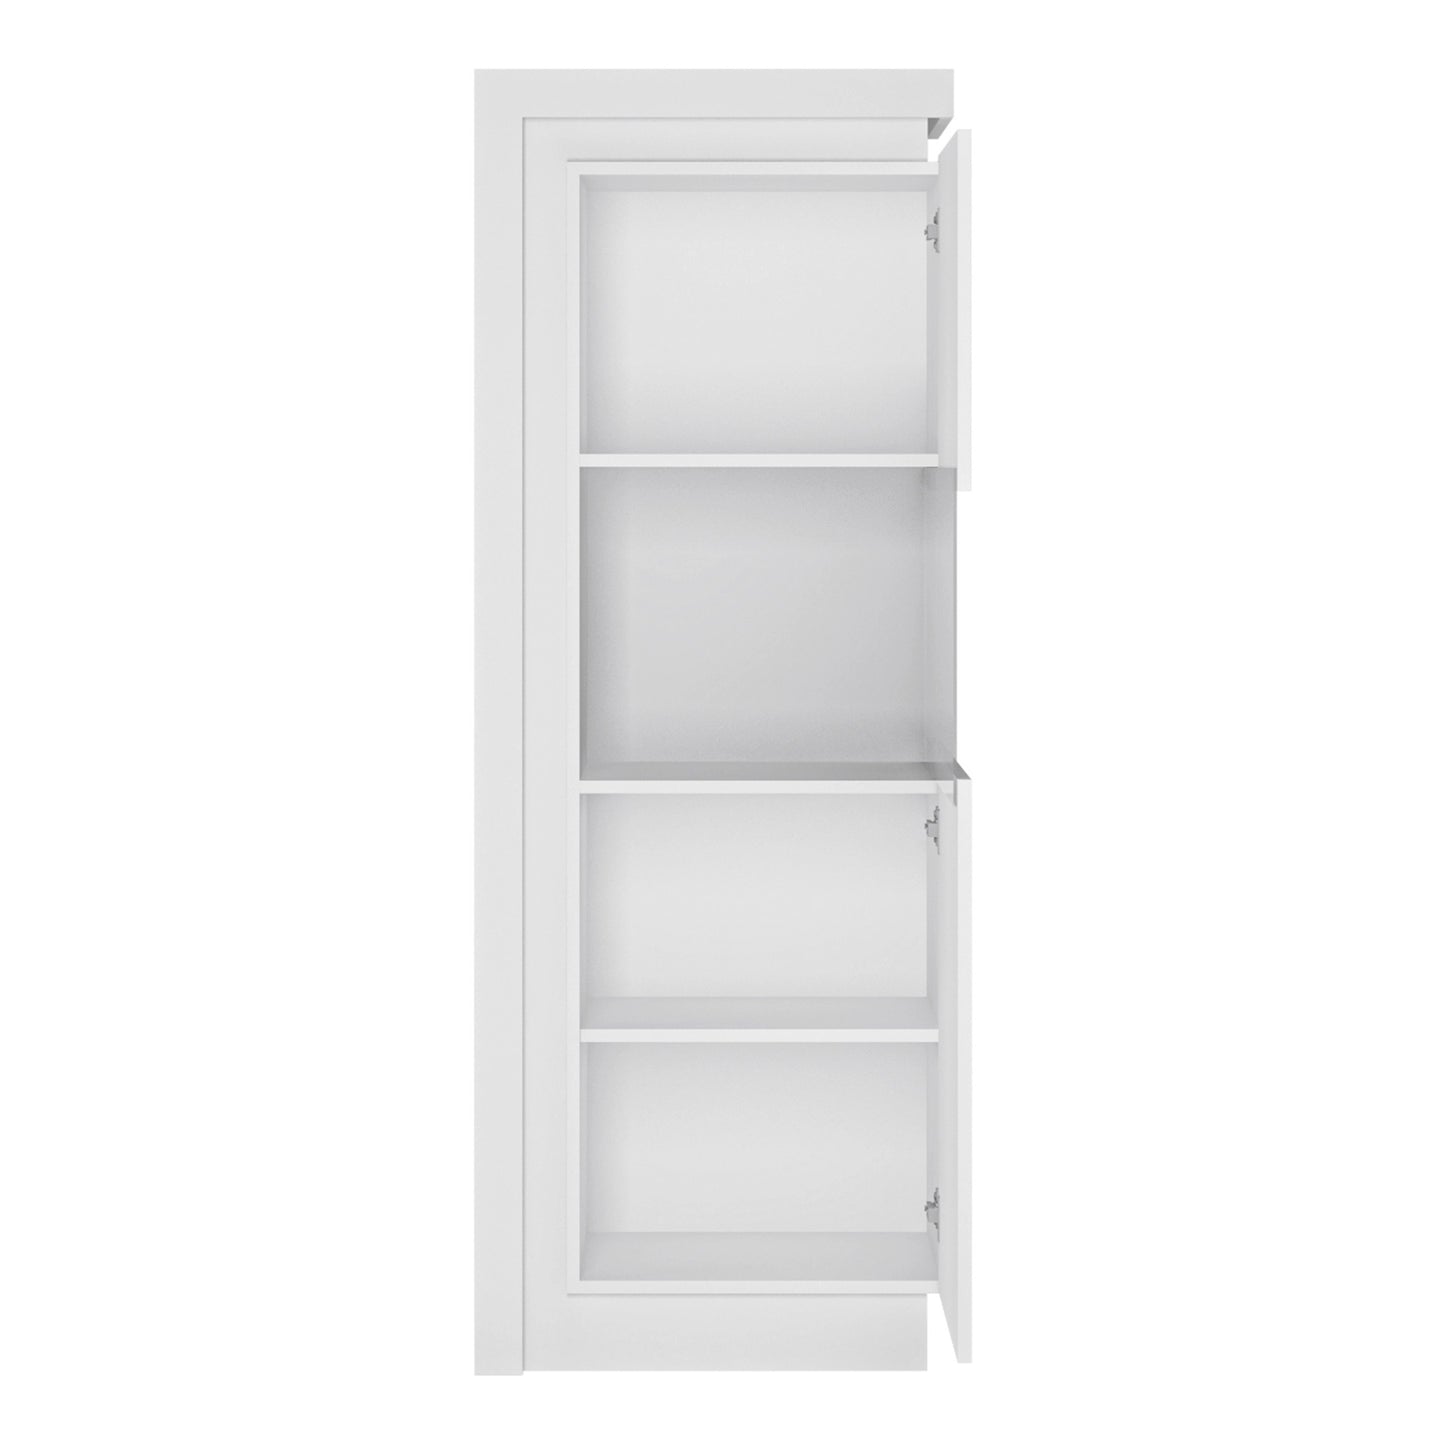 Furniture To Go Lyon Narrow Display Cabinet (RHD) 164.1cm High (Including Led Lighting) in White & High Gloss